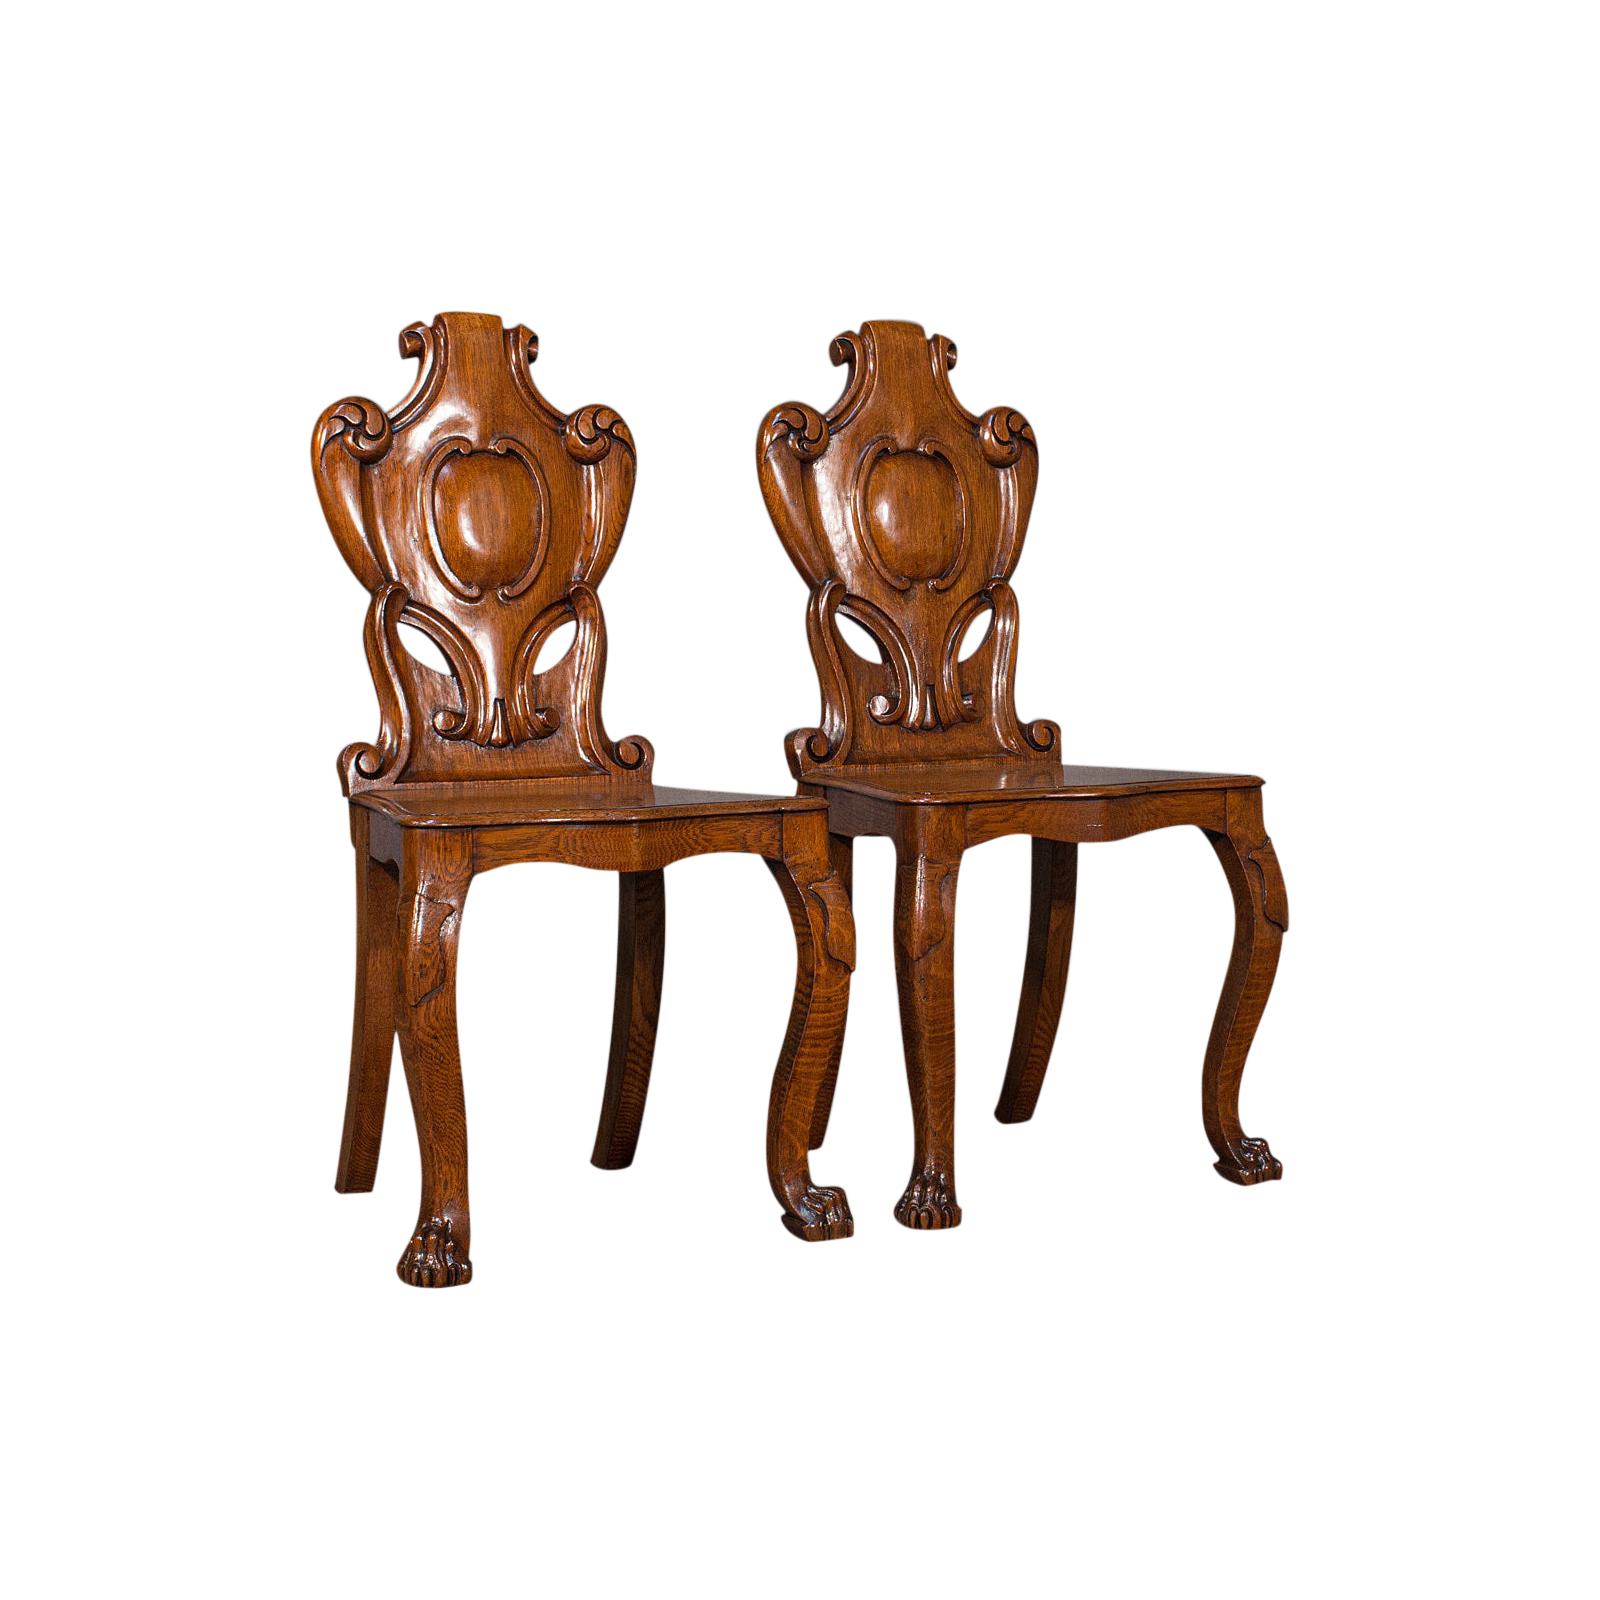 Pair of Antique Shield Back Chairs, Scottish, Oak Hall Seat Victorian circa 1880